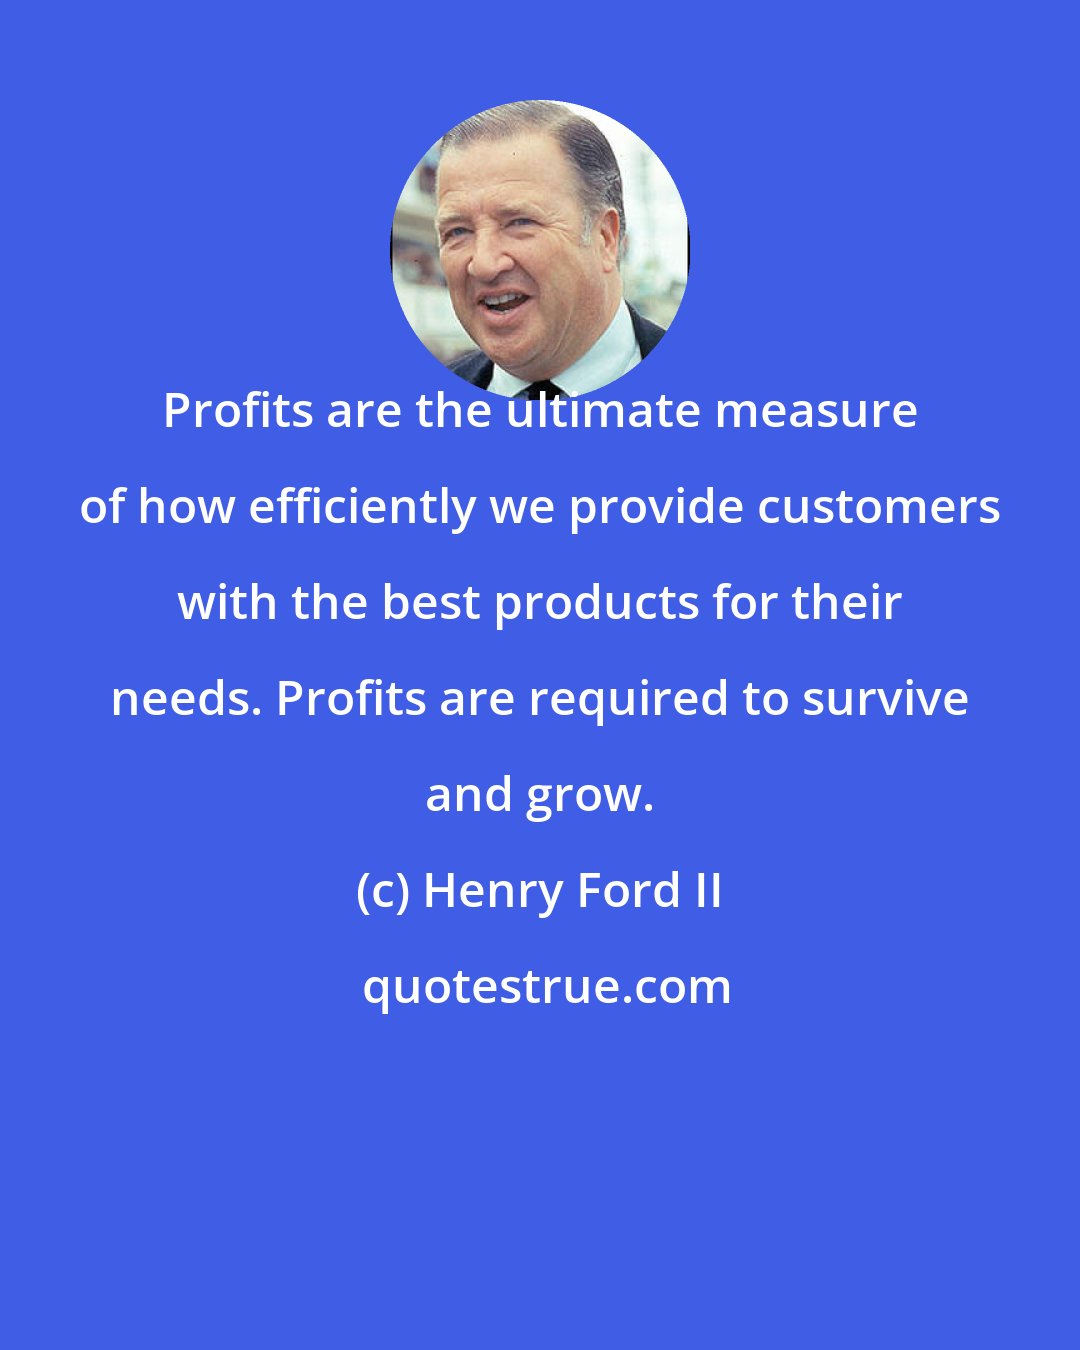 Henry Ford II: Profits are the ultimate measure of how efficiently we provide customers with the best products for their needs. Profits are required to survive and grow.